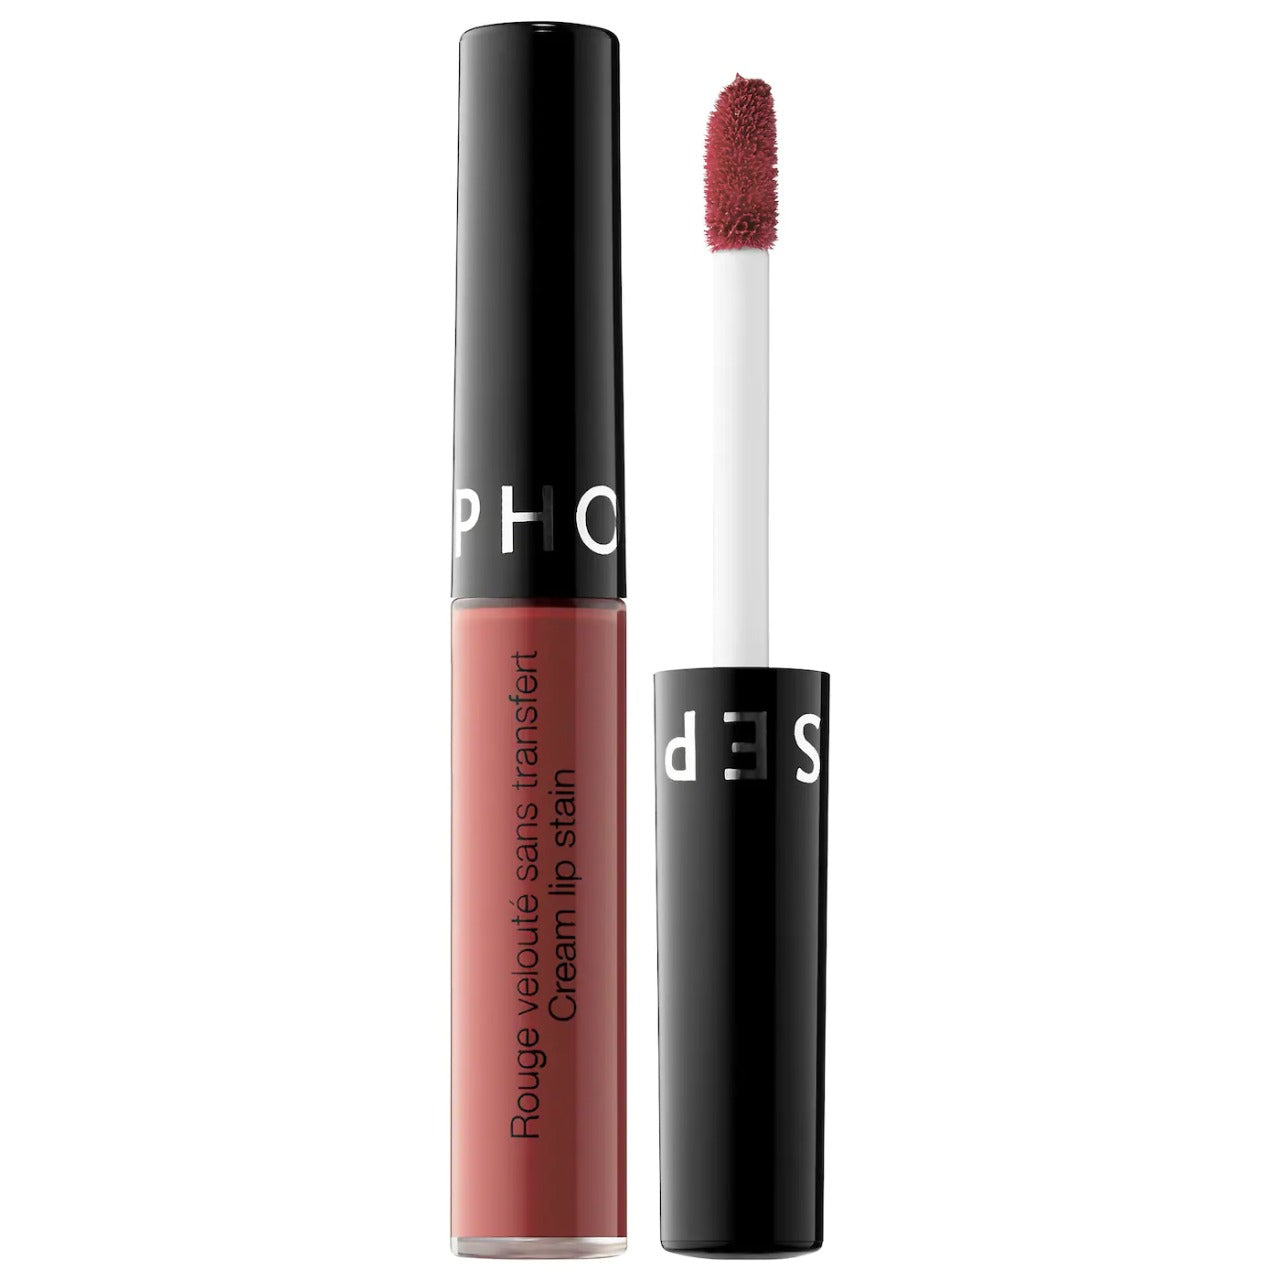 Cream Lip Stain trial size in shade 84